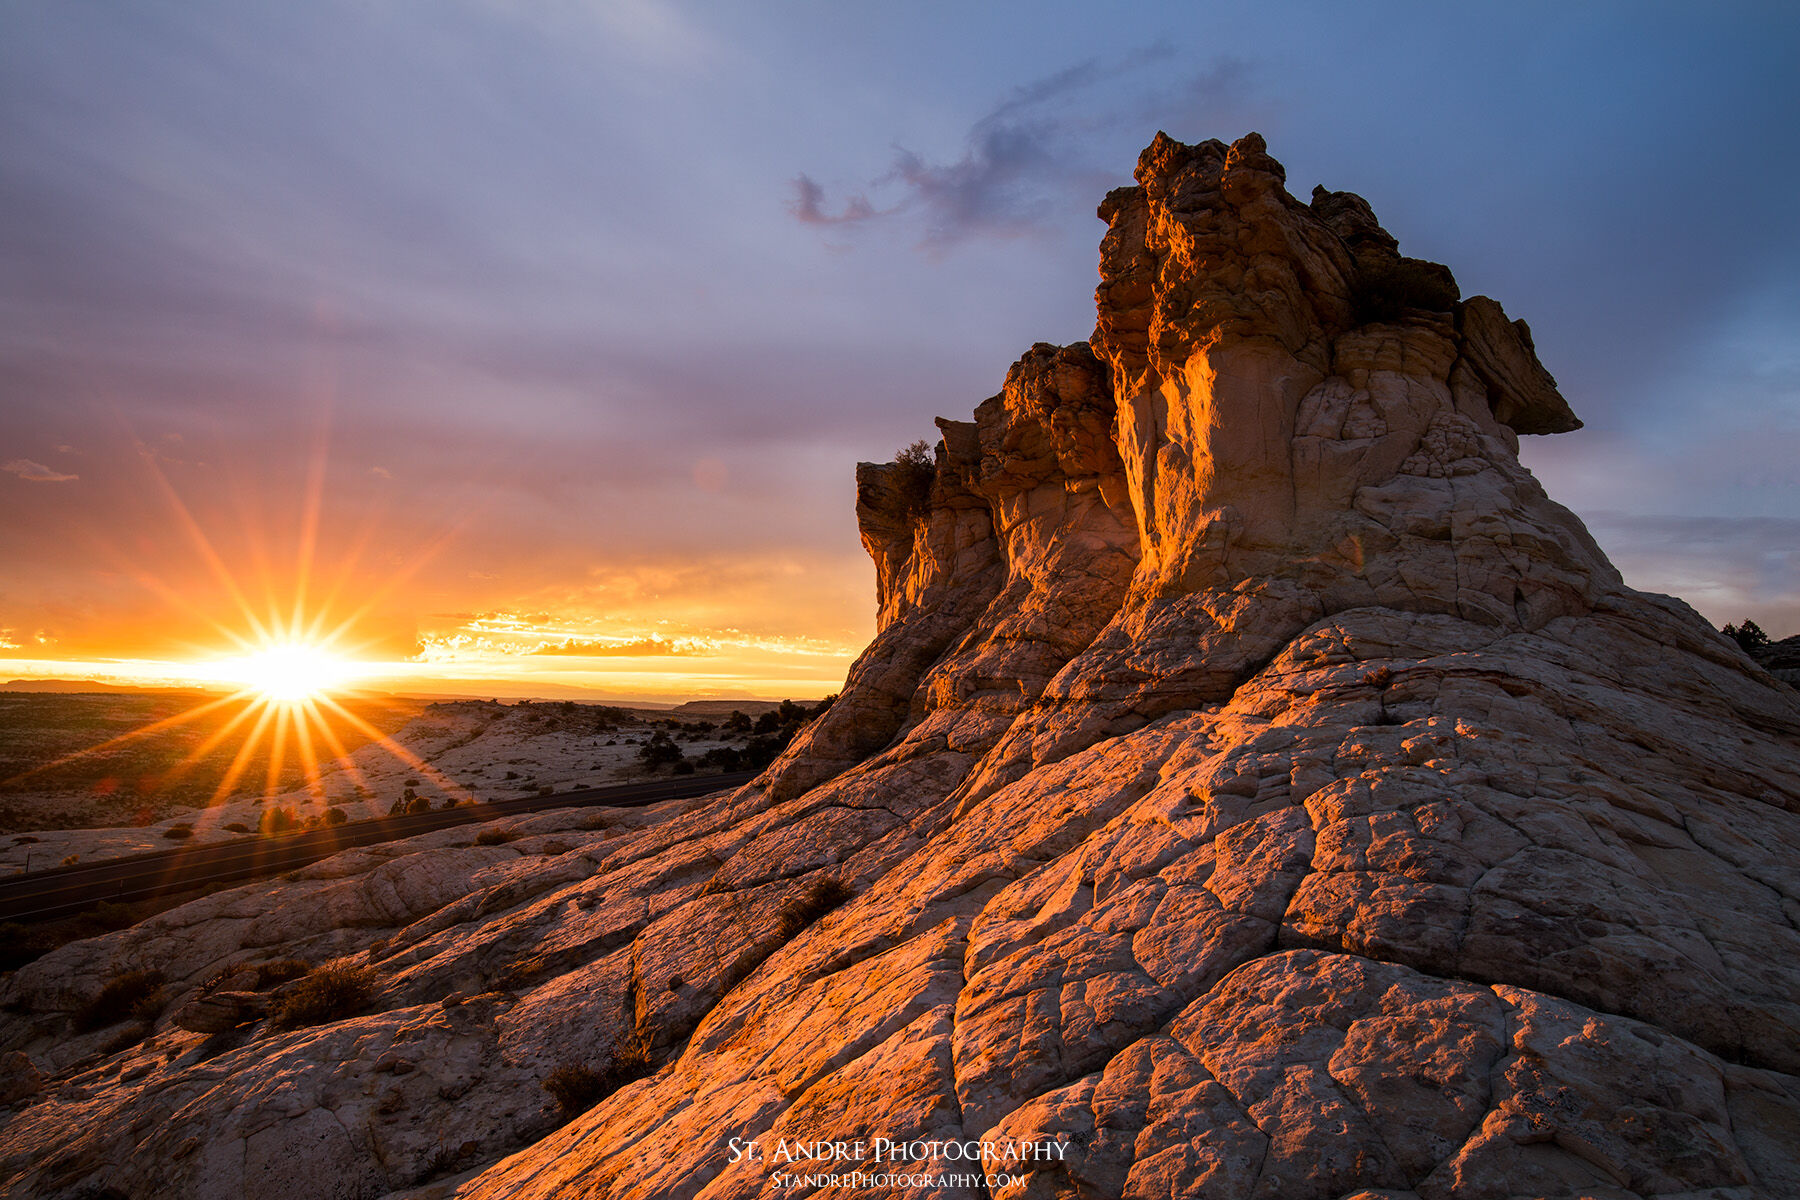 A large rock formation on the edge of Escalante Canyon with the rising sun.